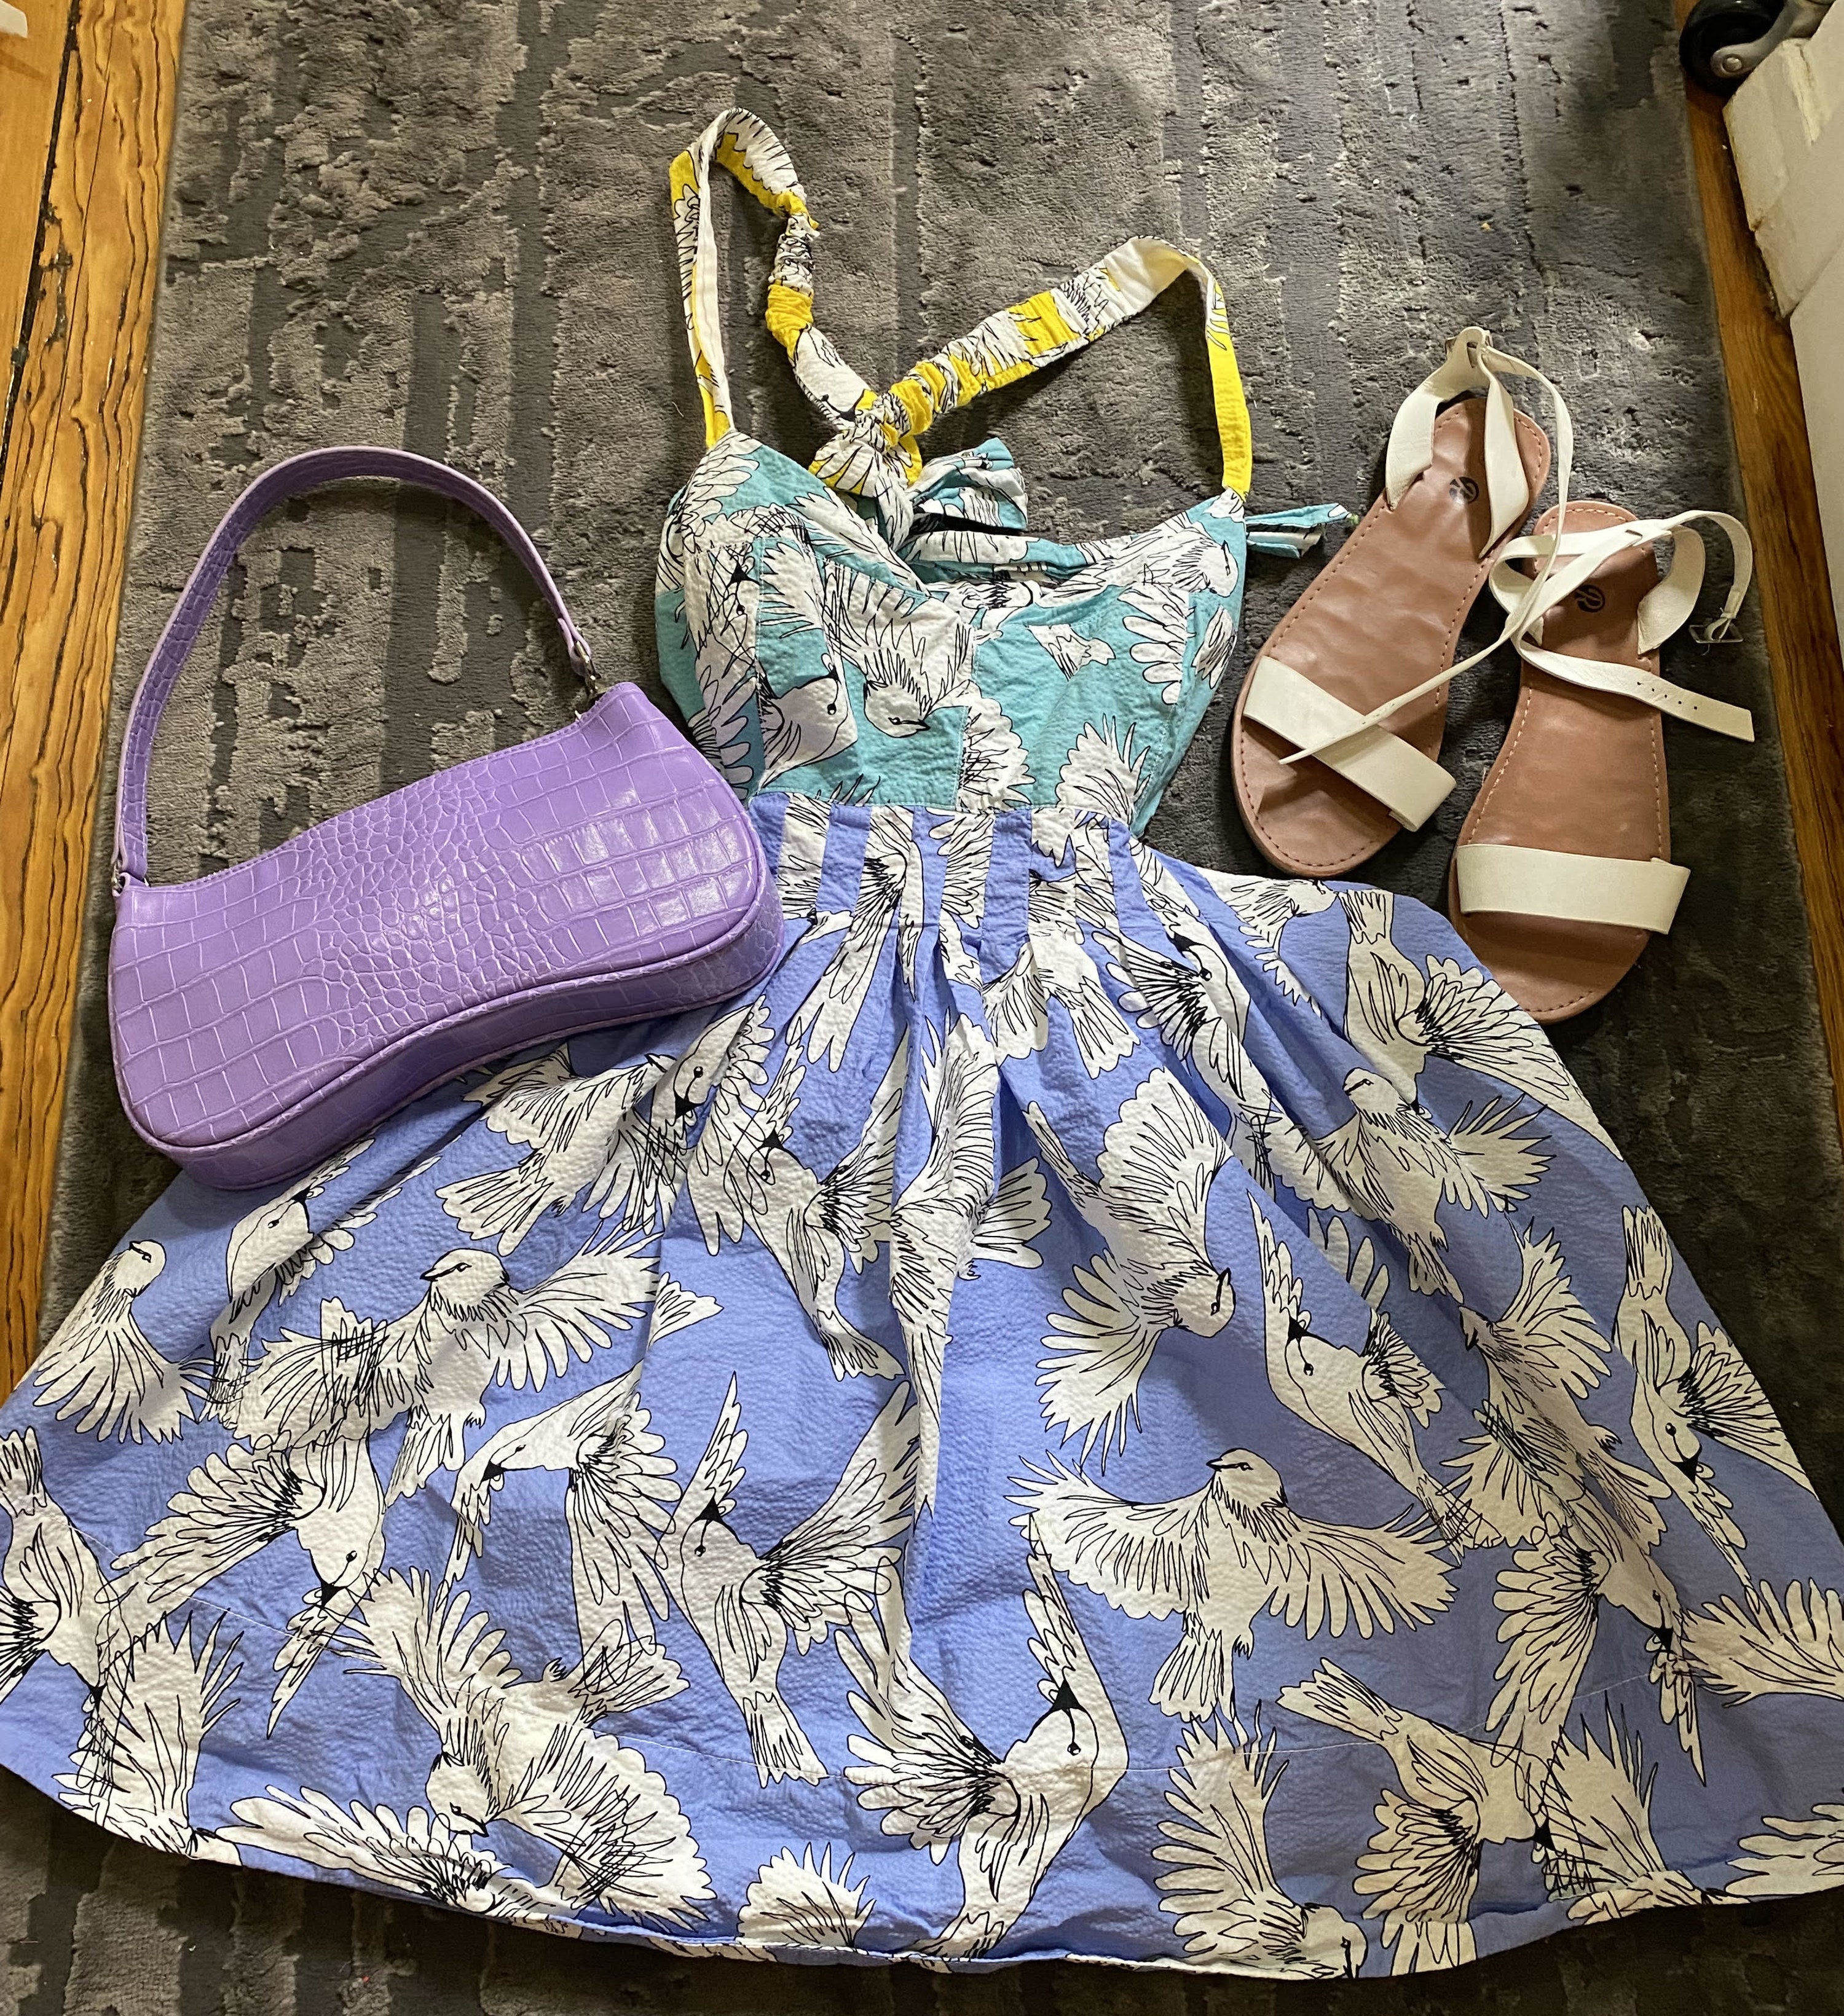 dress on floor with a purse and sandals beside of it